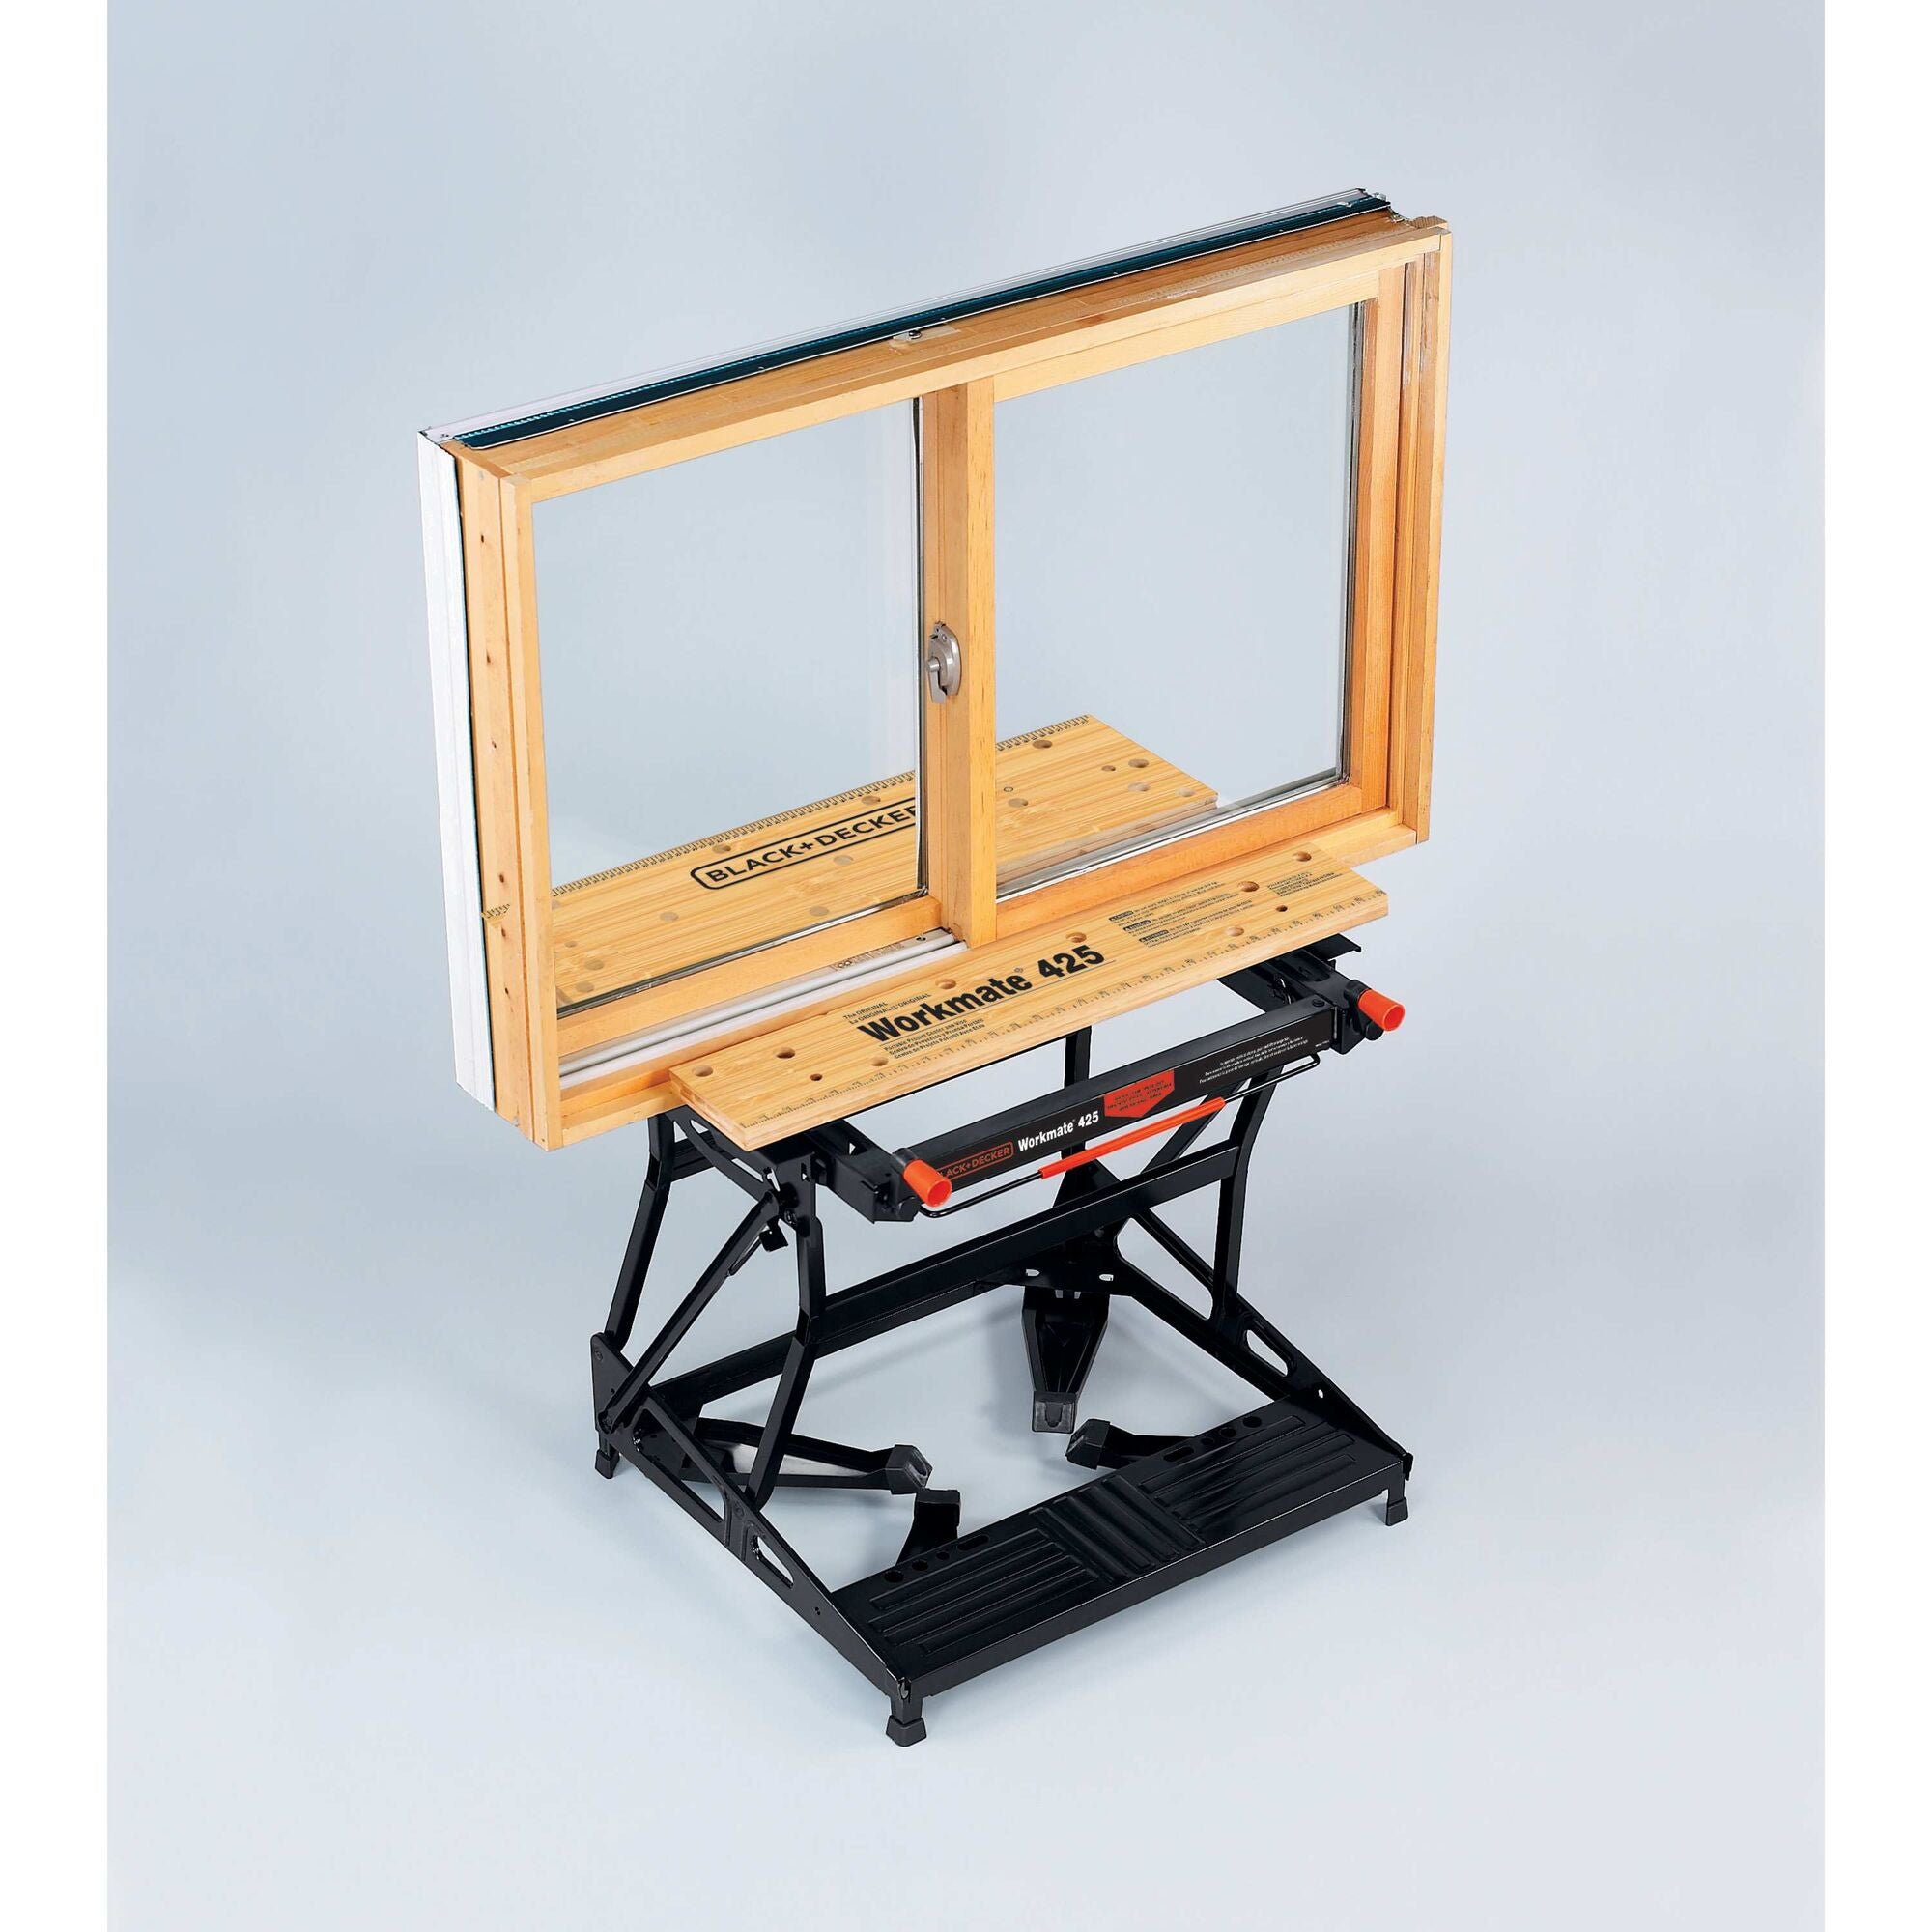 Profile of workmate p425 portable project center and vise.